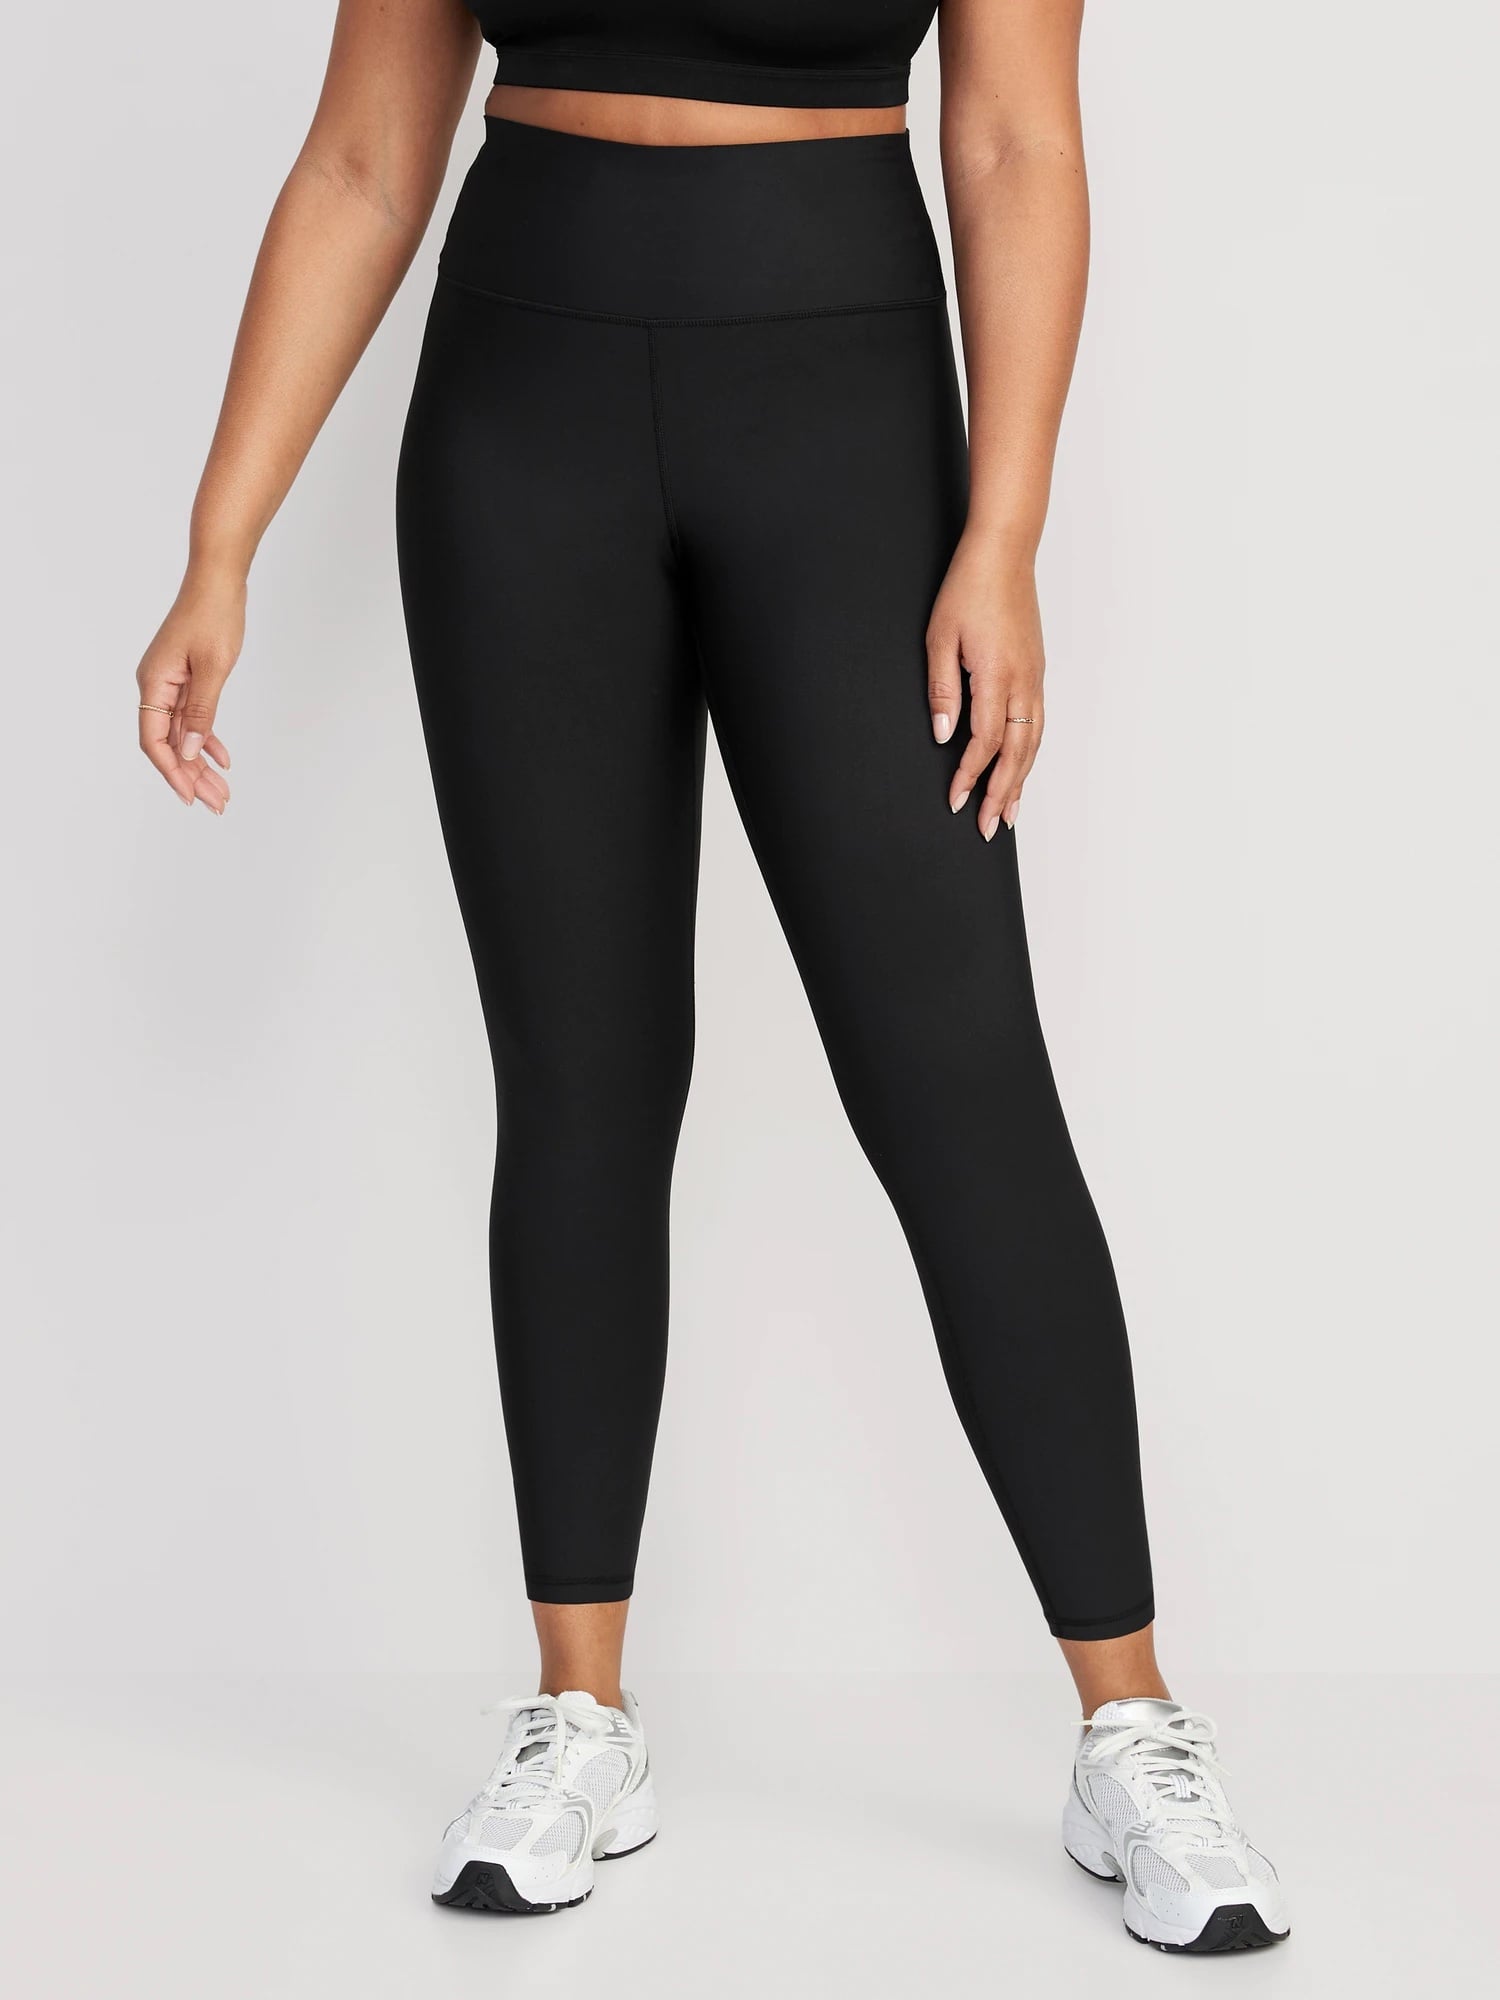 Today Only: TSLA Compression Pants and Yoga Leggings Up to 23% Off